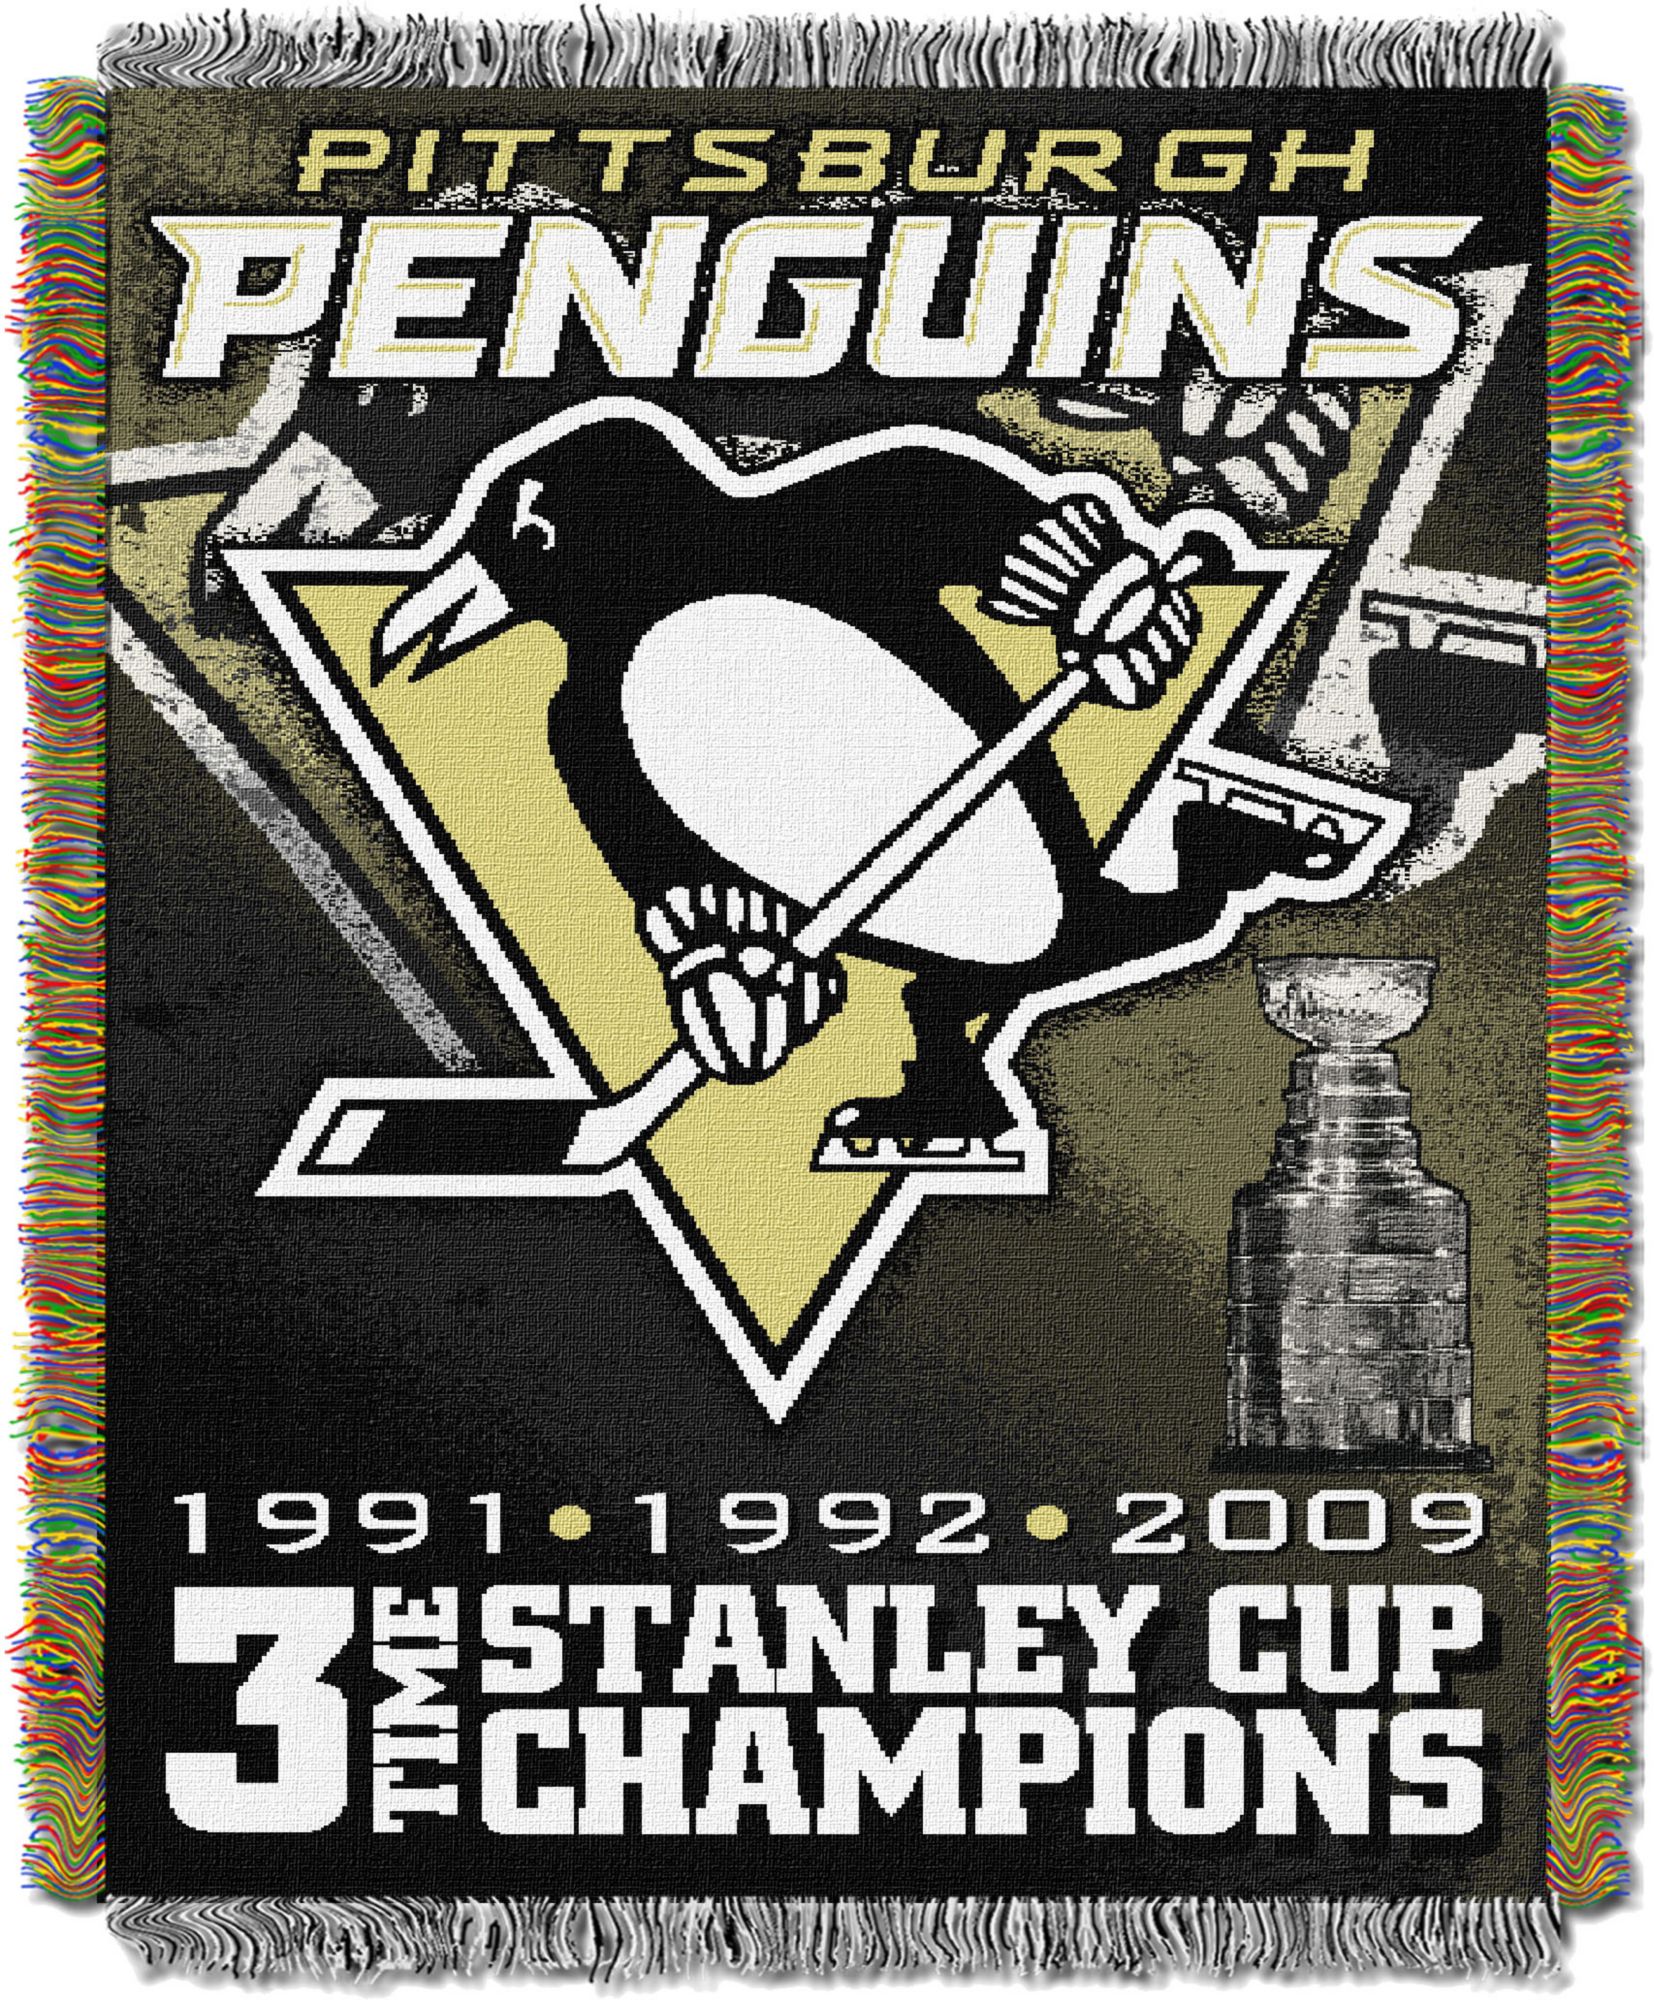 TheNorthwest Pittsburgh Penguins 45'' x 60'' 3-Time Stanley Cup Champions Tapestry Throw Blanket